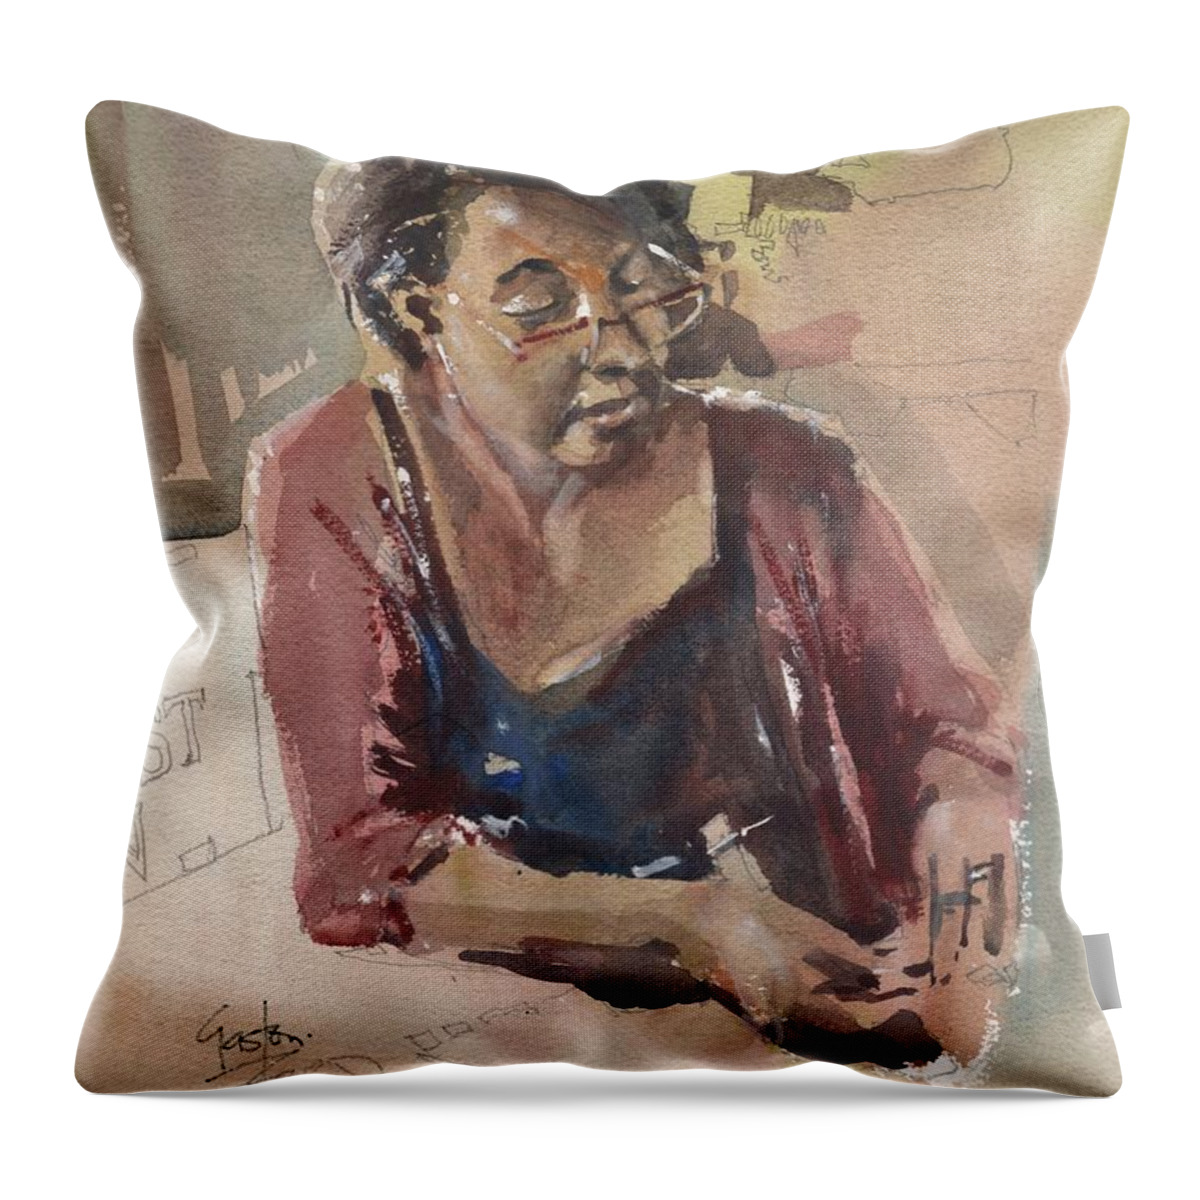 Tampa Throw Pillow featuring the painting Vision Portrait by Gaston McKenzie